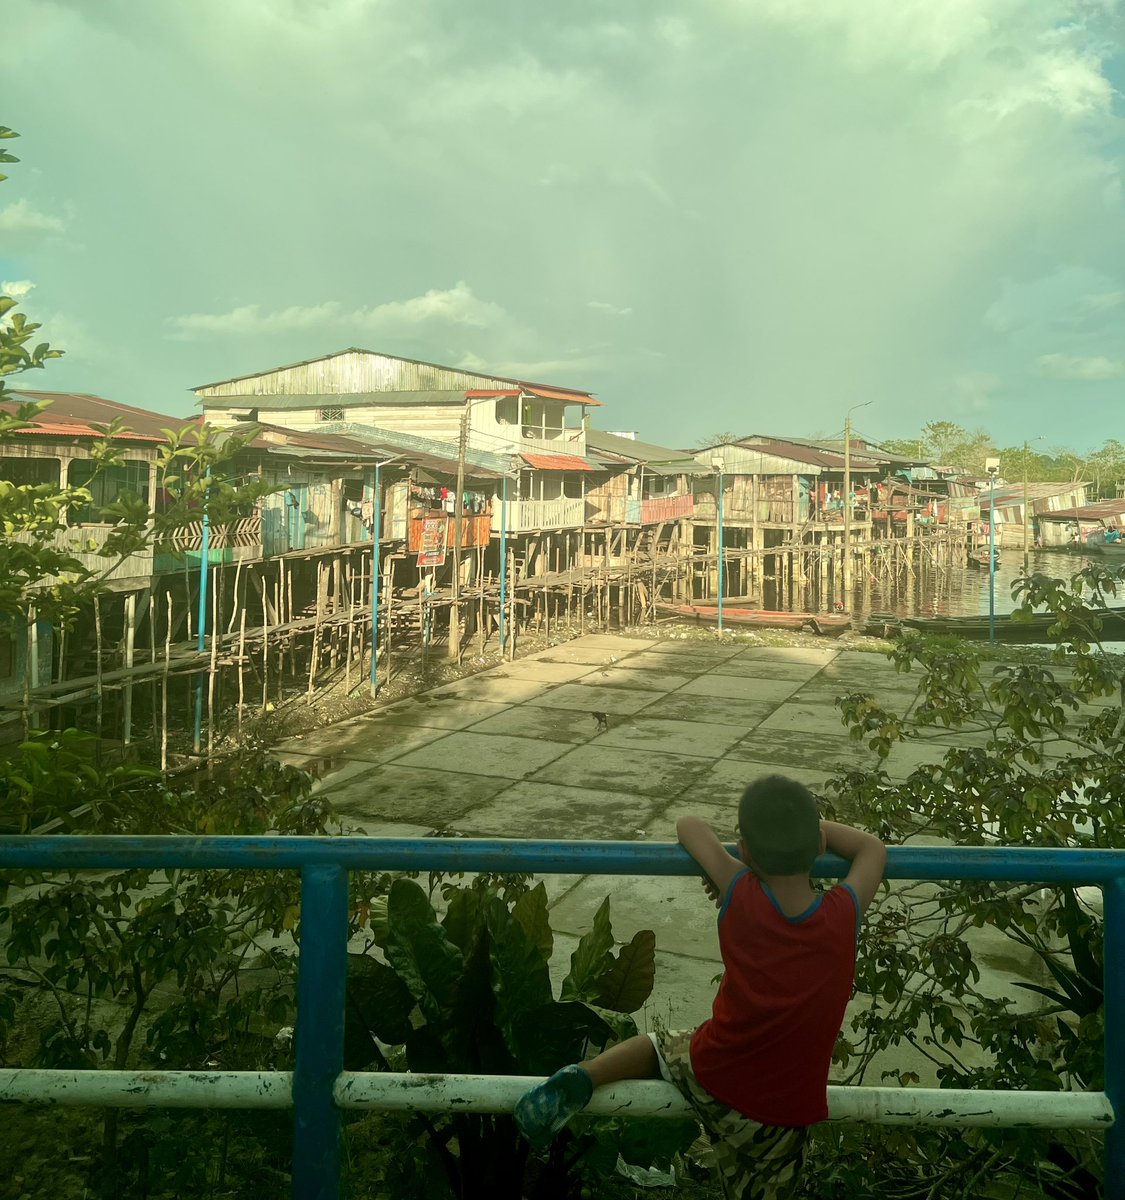 Landed in Iquitos, Peru. Headed for another bucket list item: luxury cruise in the Amazon. Seen below is a shanty town all built on stilts. During the wet season, the river rises 35 *feet* from rain and snowmelt and everything you see is underwater (except the homes).